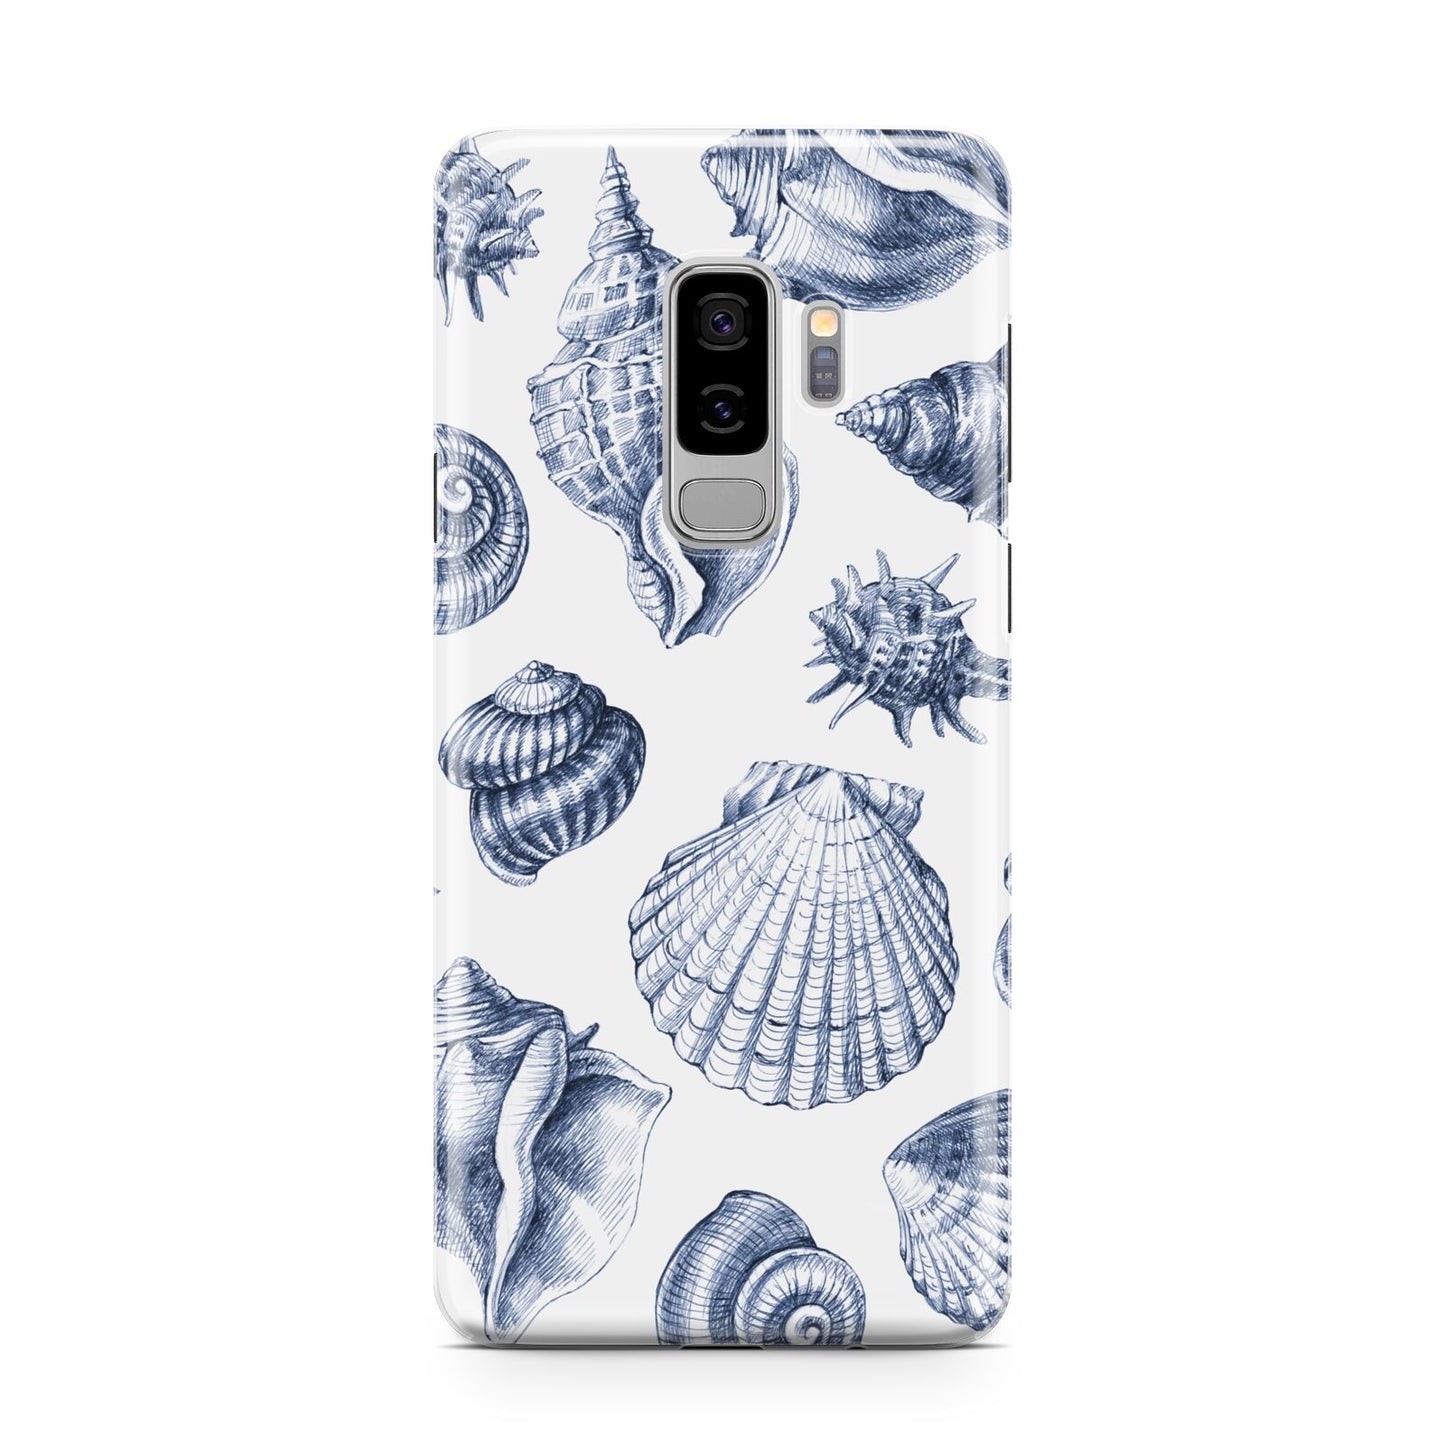 Shell Samsung Galaxy S9 Plus Case on Silver phone